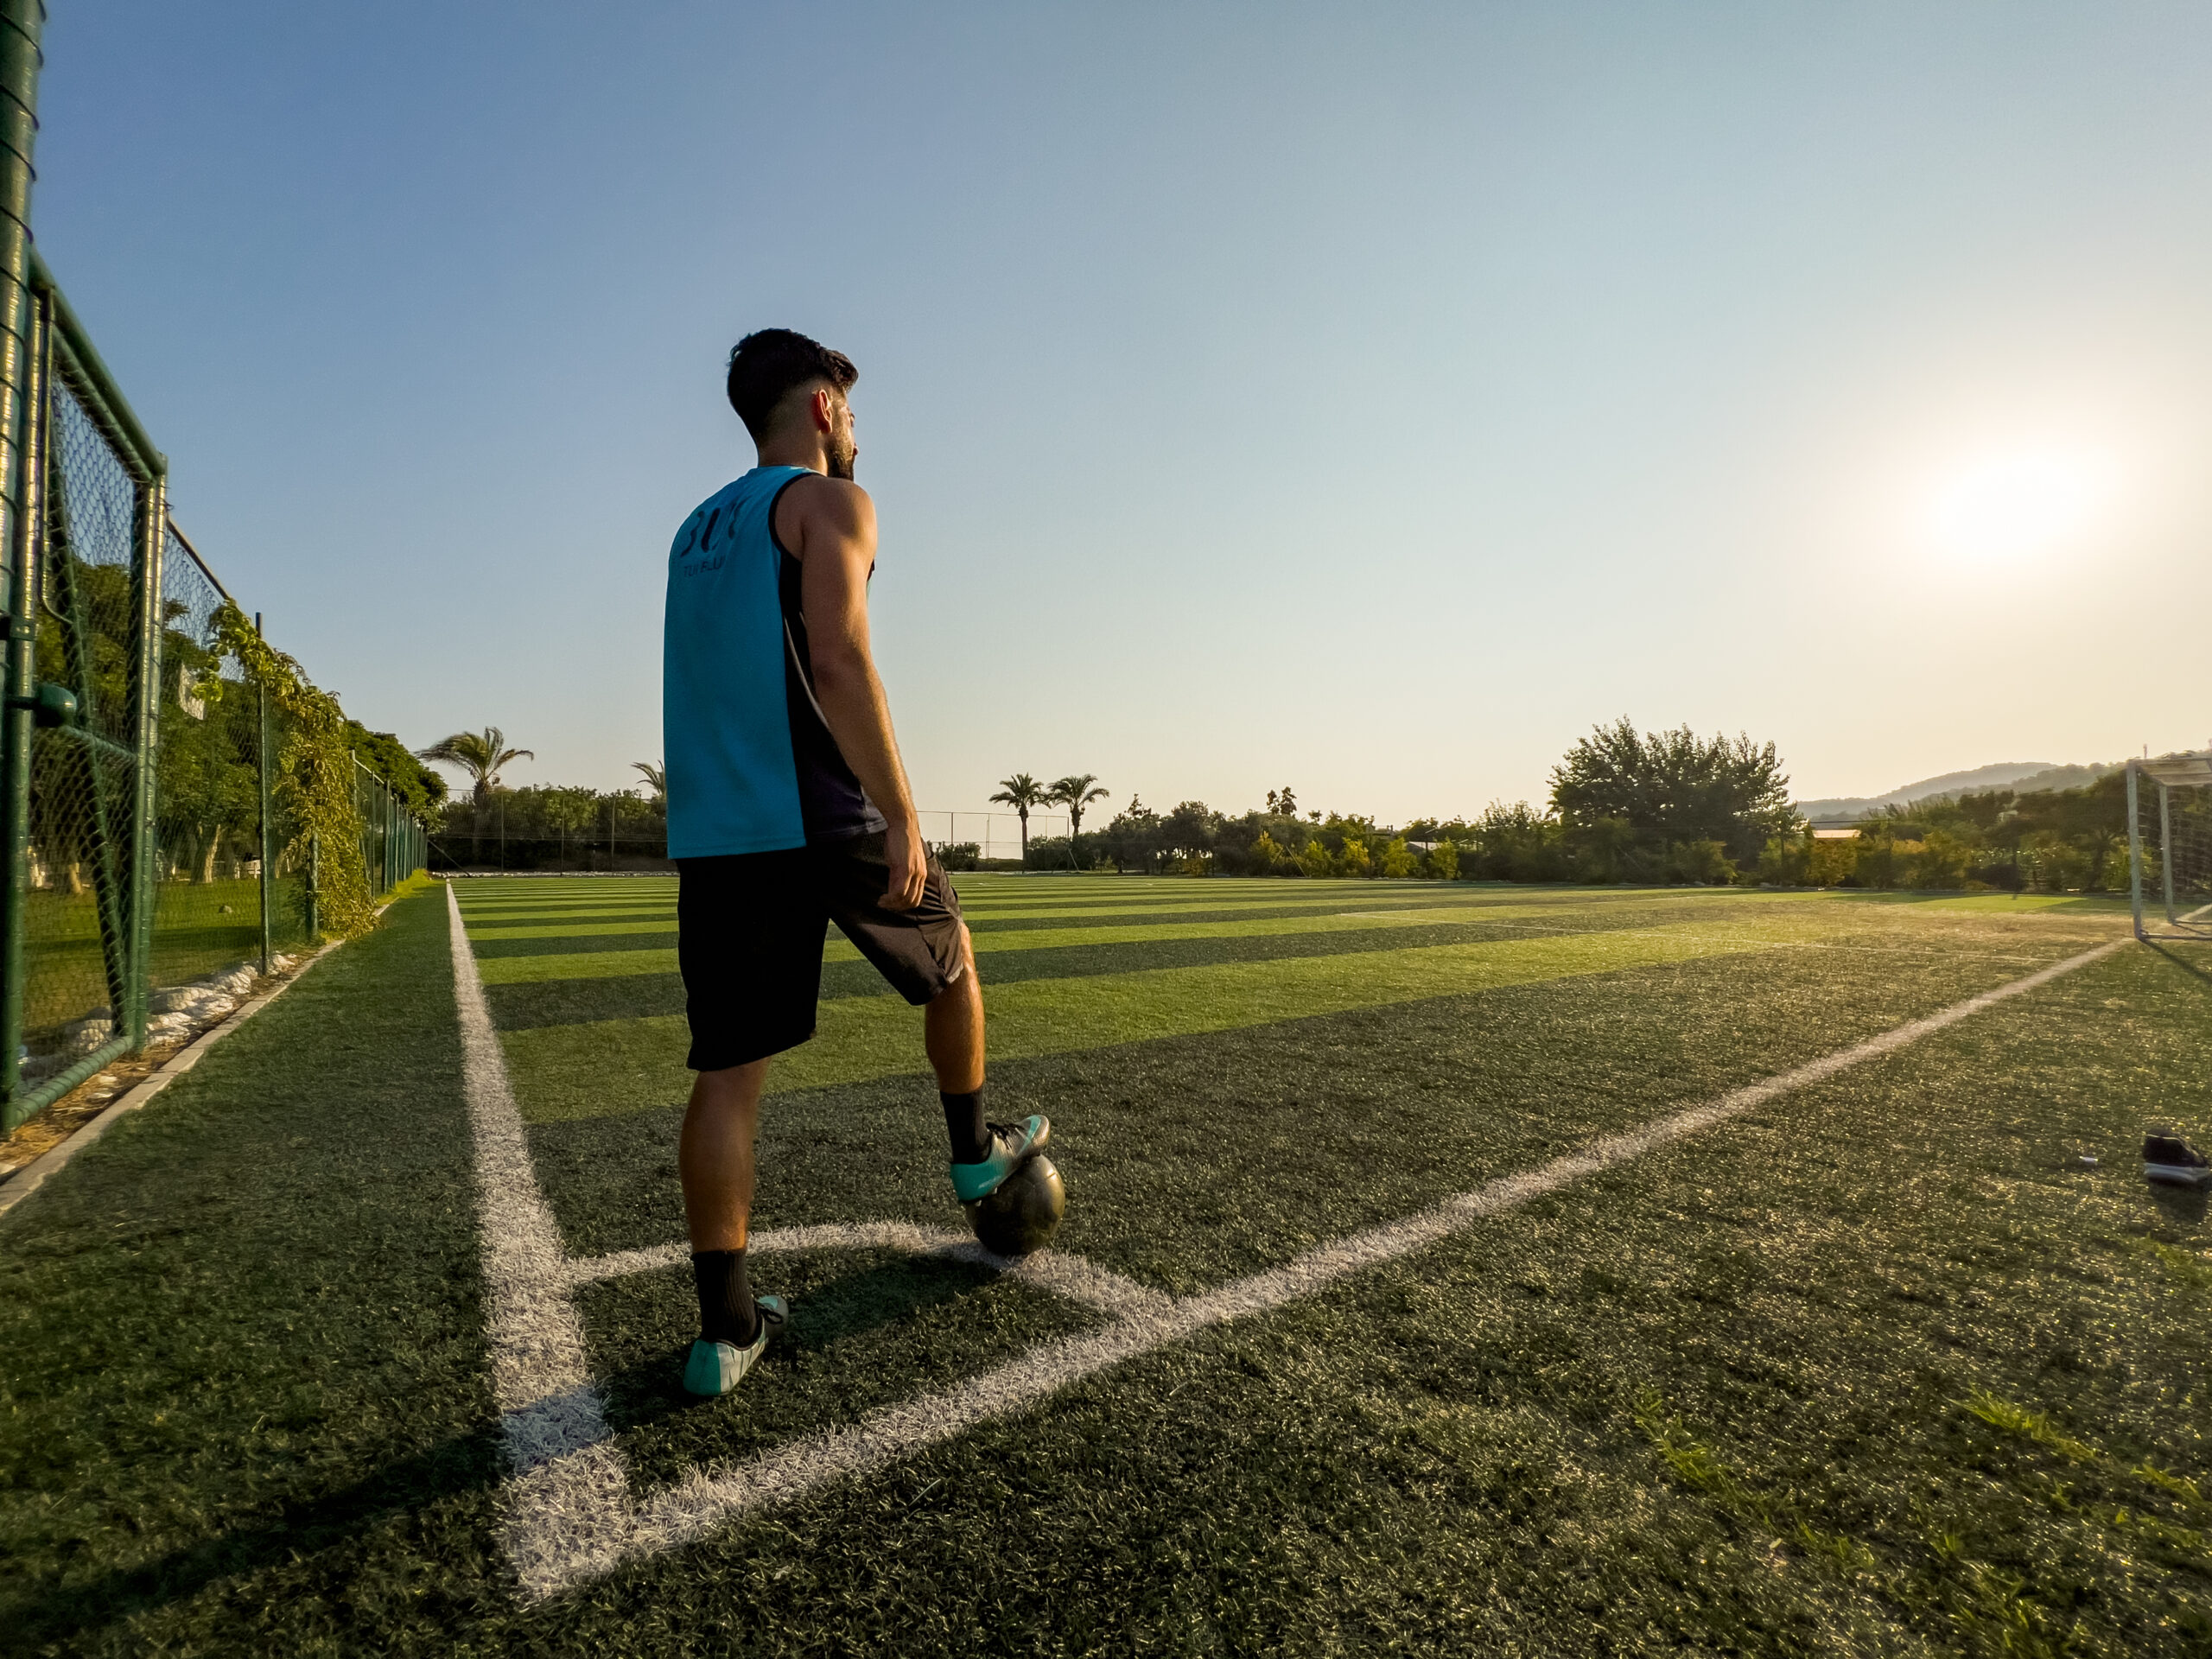 A football coach stood on the corner quadrant of the pitch with a ball under his feet. He is staring out across a football pitch with the sunset clear in view. he is wearing a TUI Football Coach uniform.